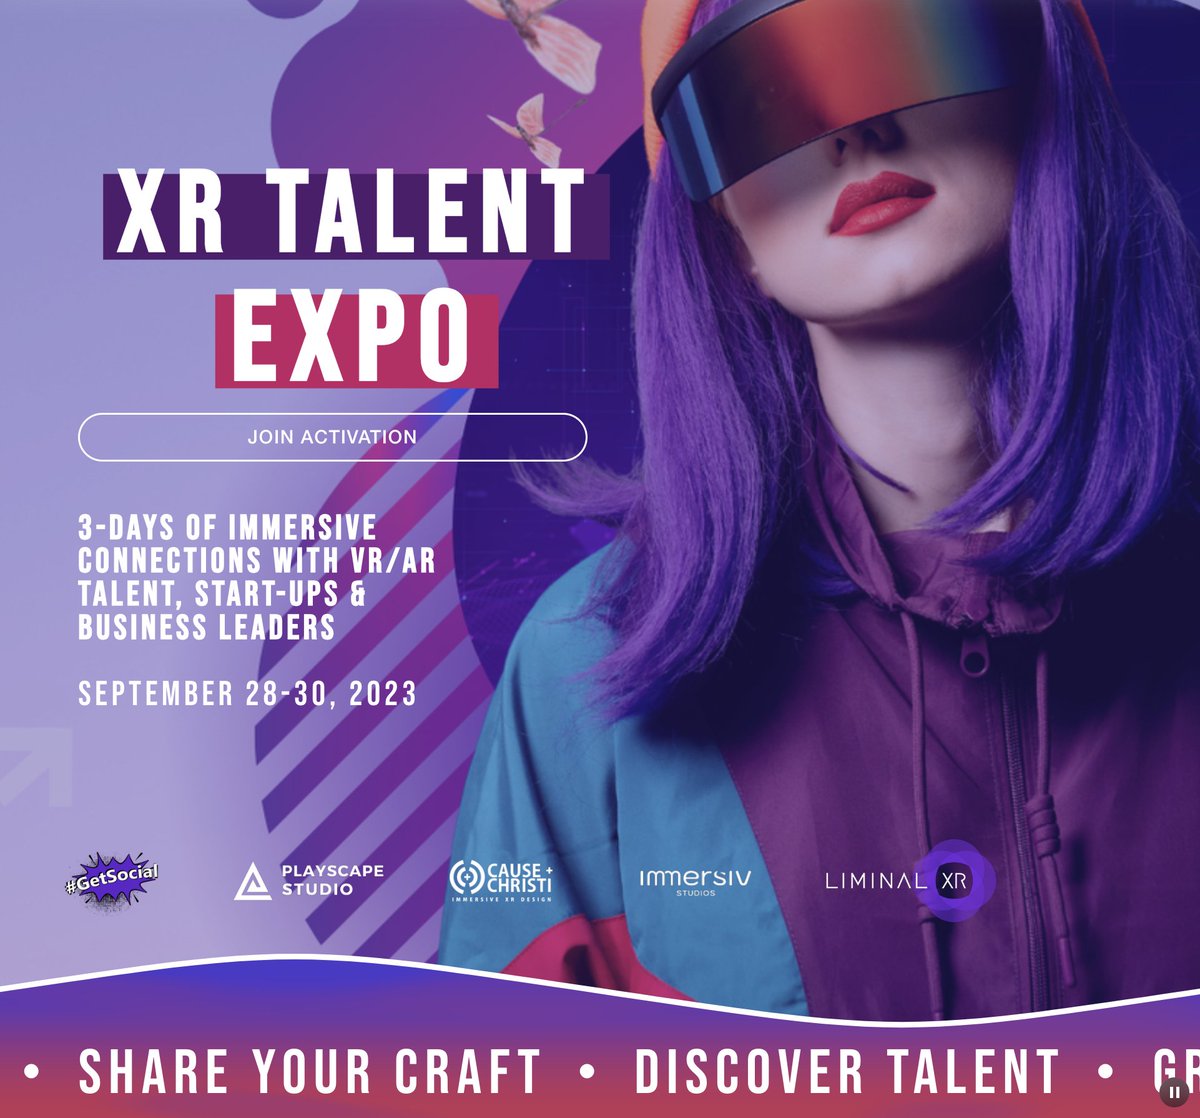 #XRTALENTEXPO ⚡ Join three days of immersive connections featuring VR/AR talent, startups, and business leaders on Sept. 28-30. #socialVR ➡️ + 15 Featured Events ➡️ + 180 Applications! ➡️ + Multiplatform Experience ➡️ Lobby in @frame_vr Website: getsocial.world